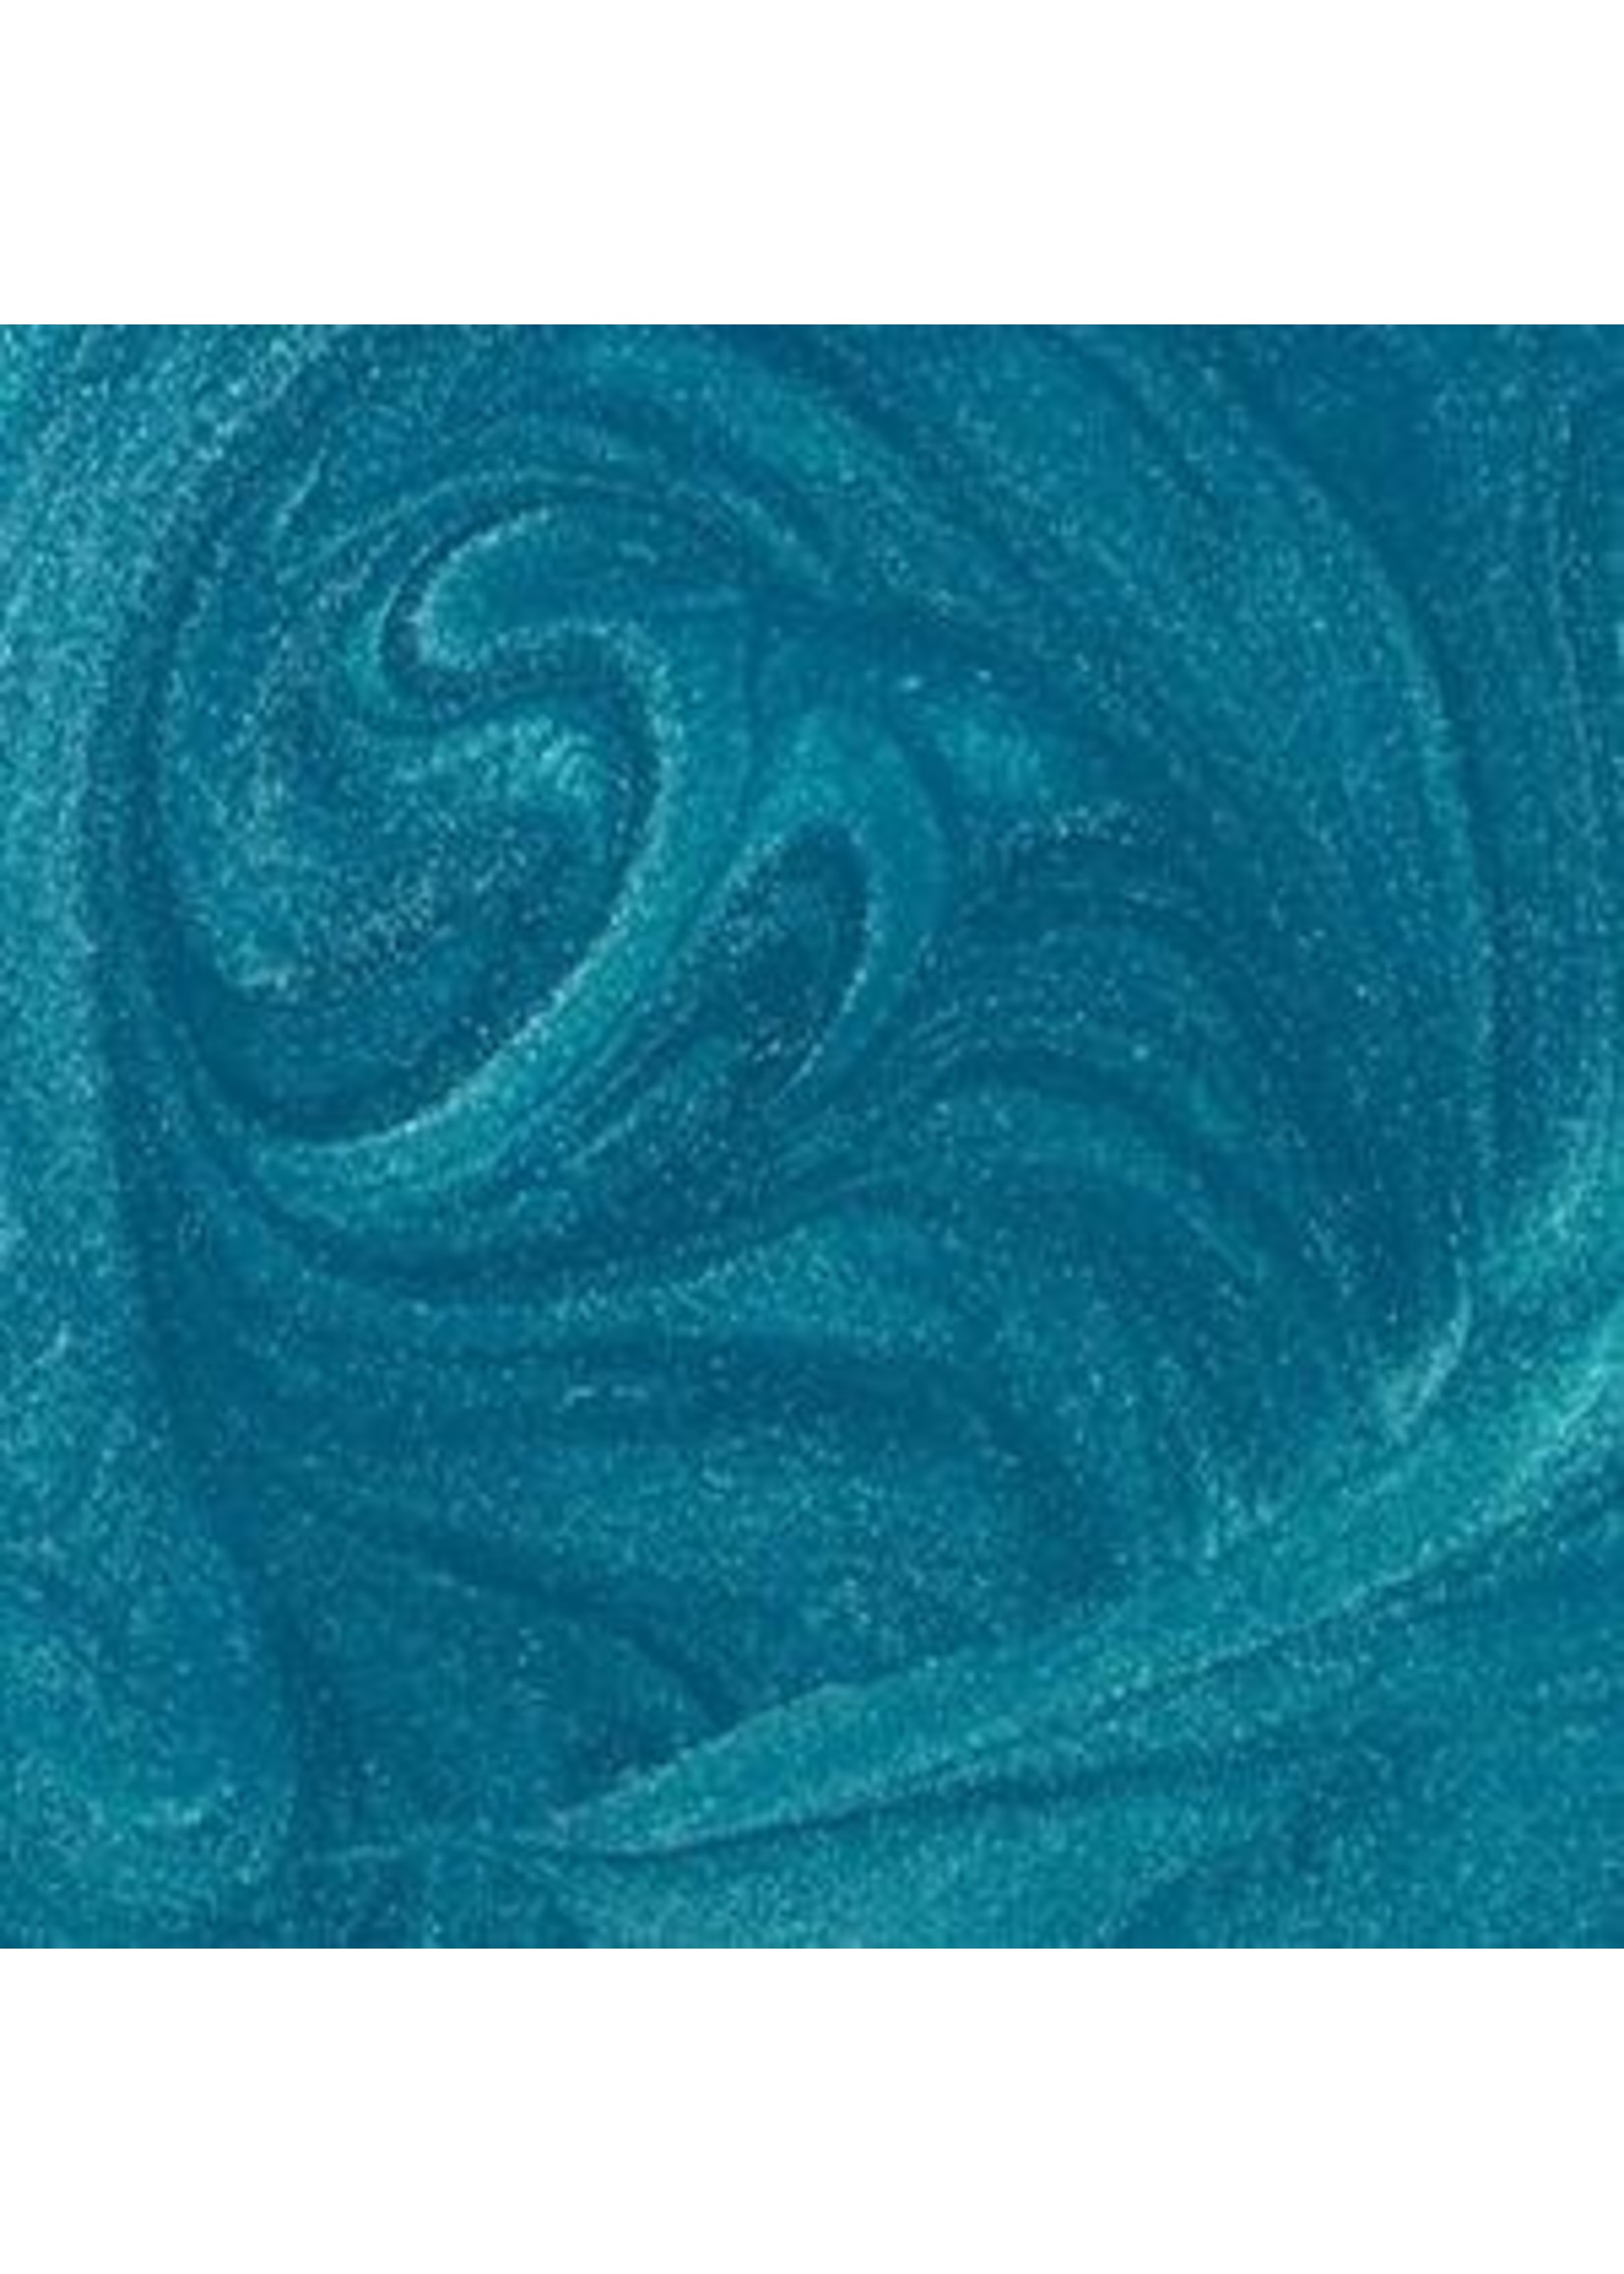 Mission Models MMP-161 - Iridescent Turquoise 1oz